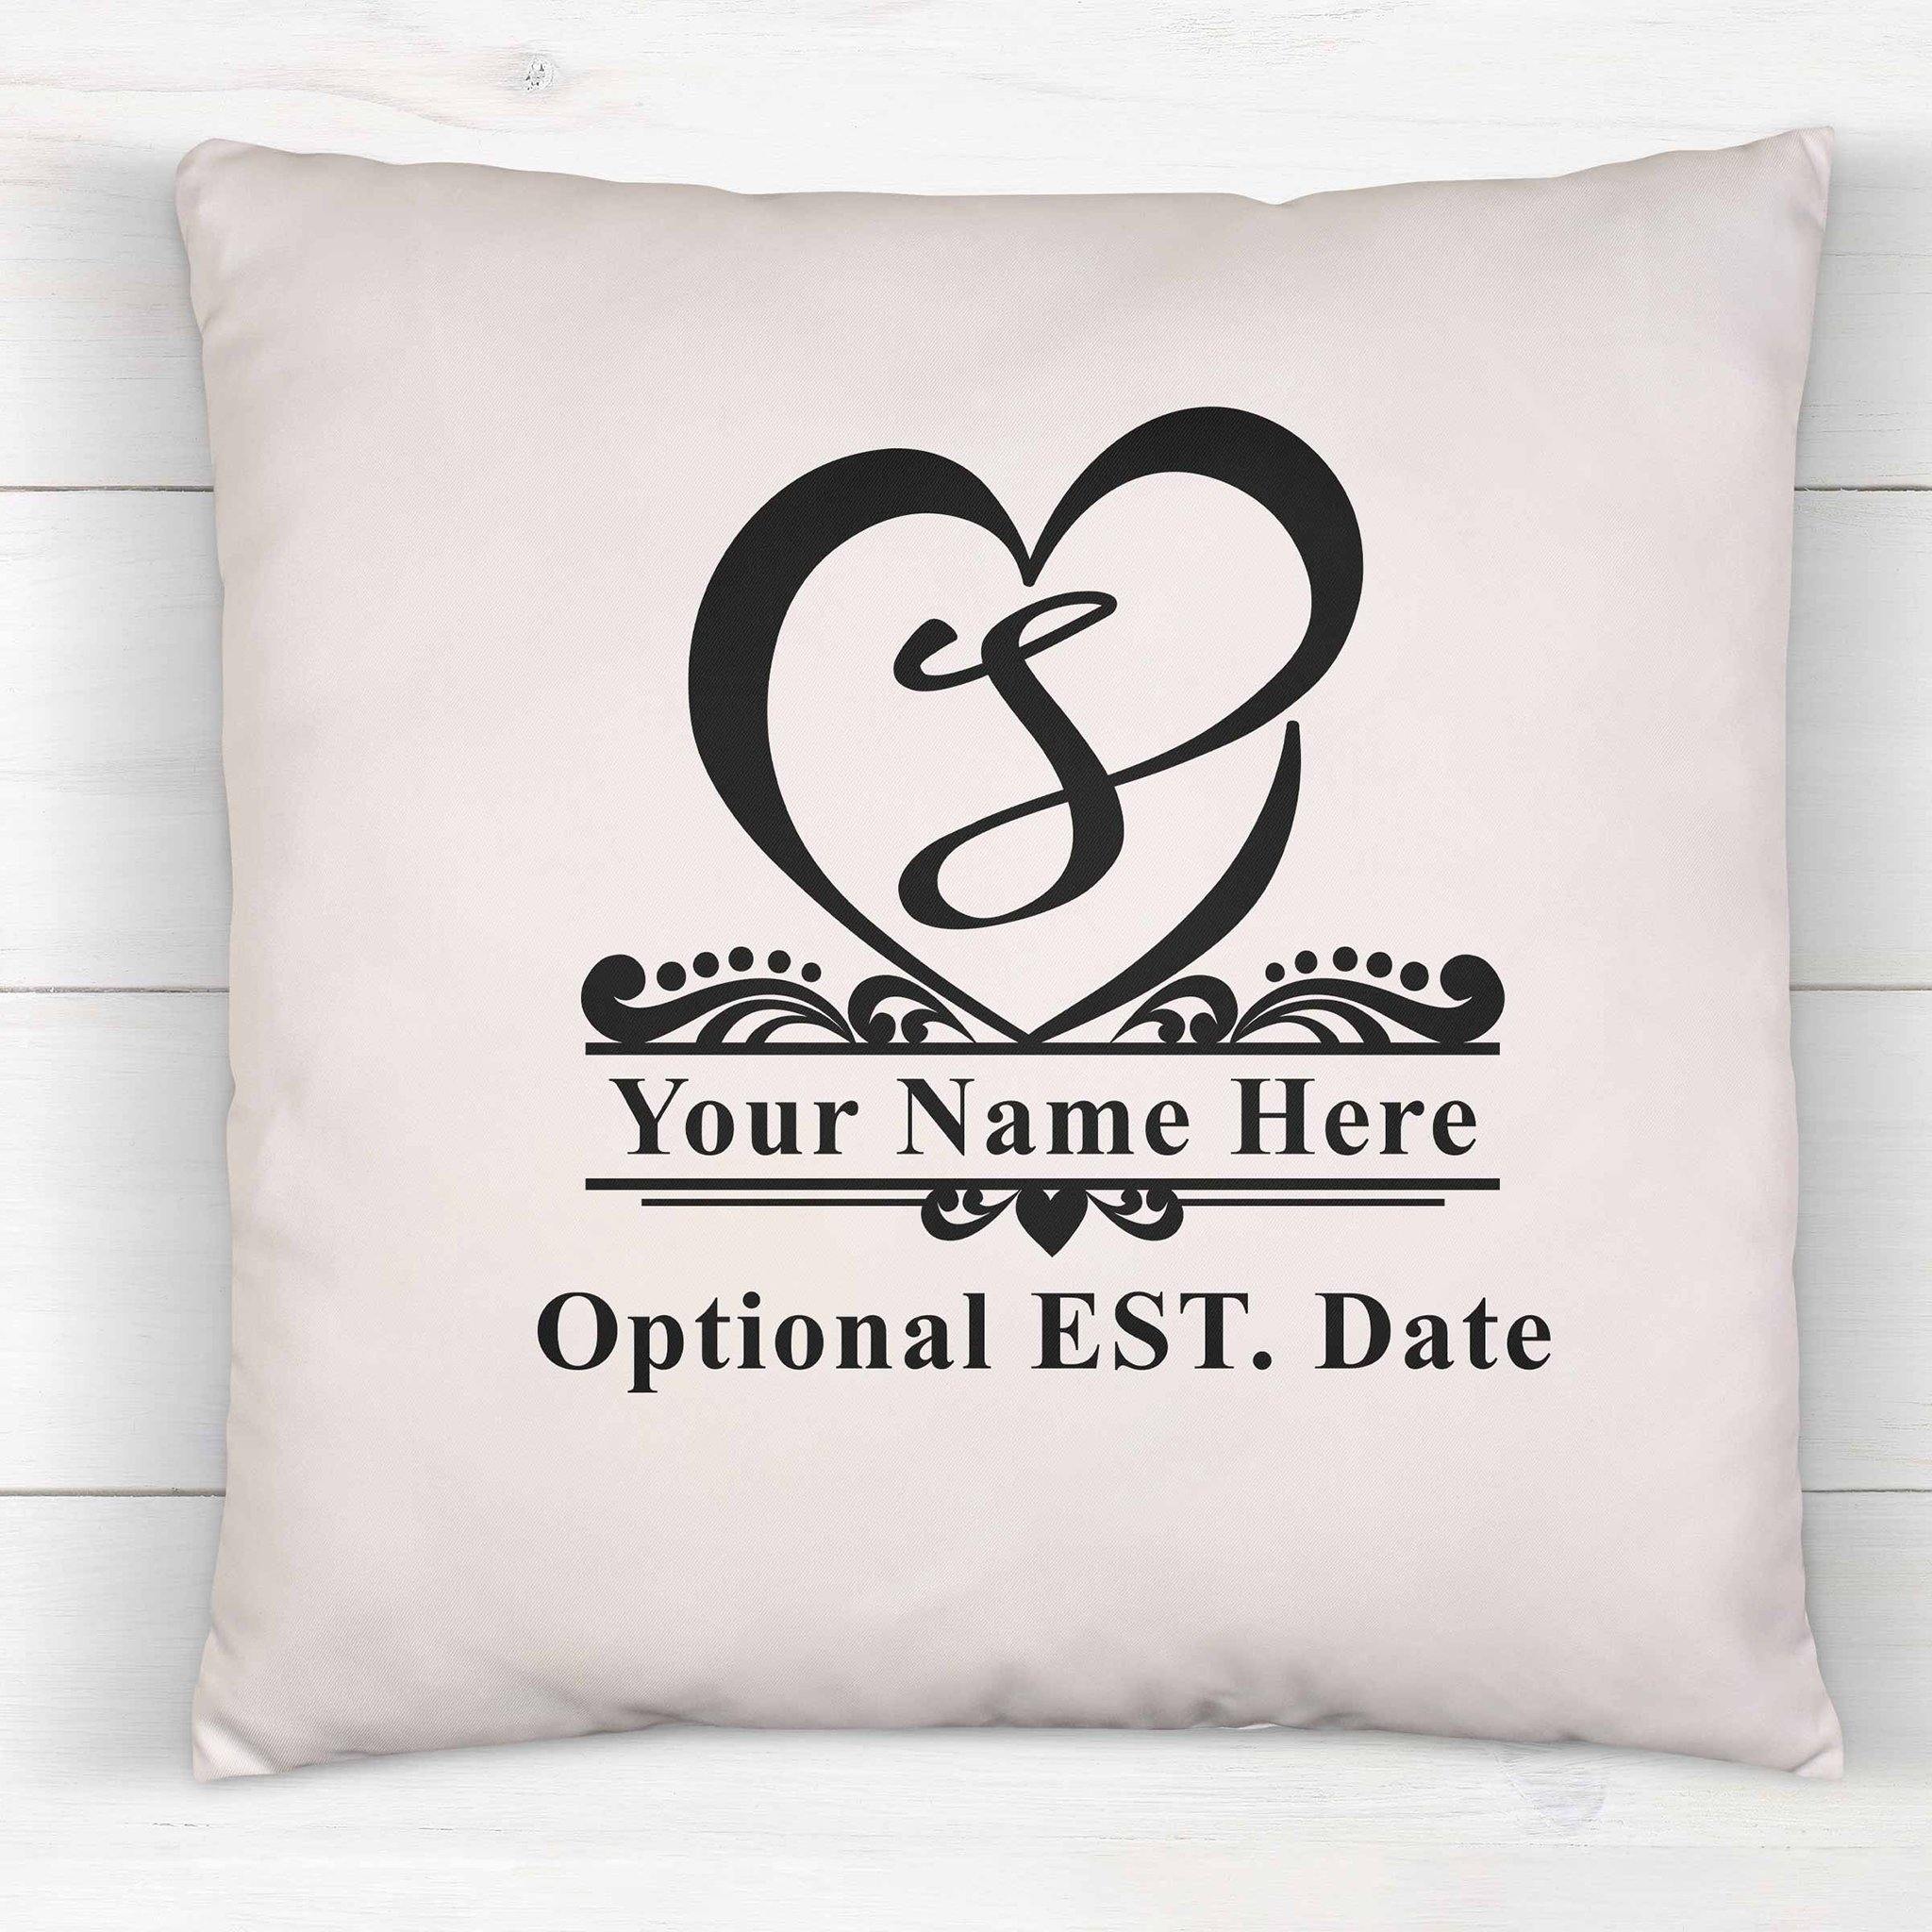 Family Name Pillows | Customly Gifts